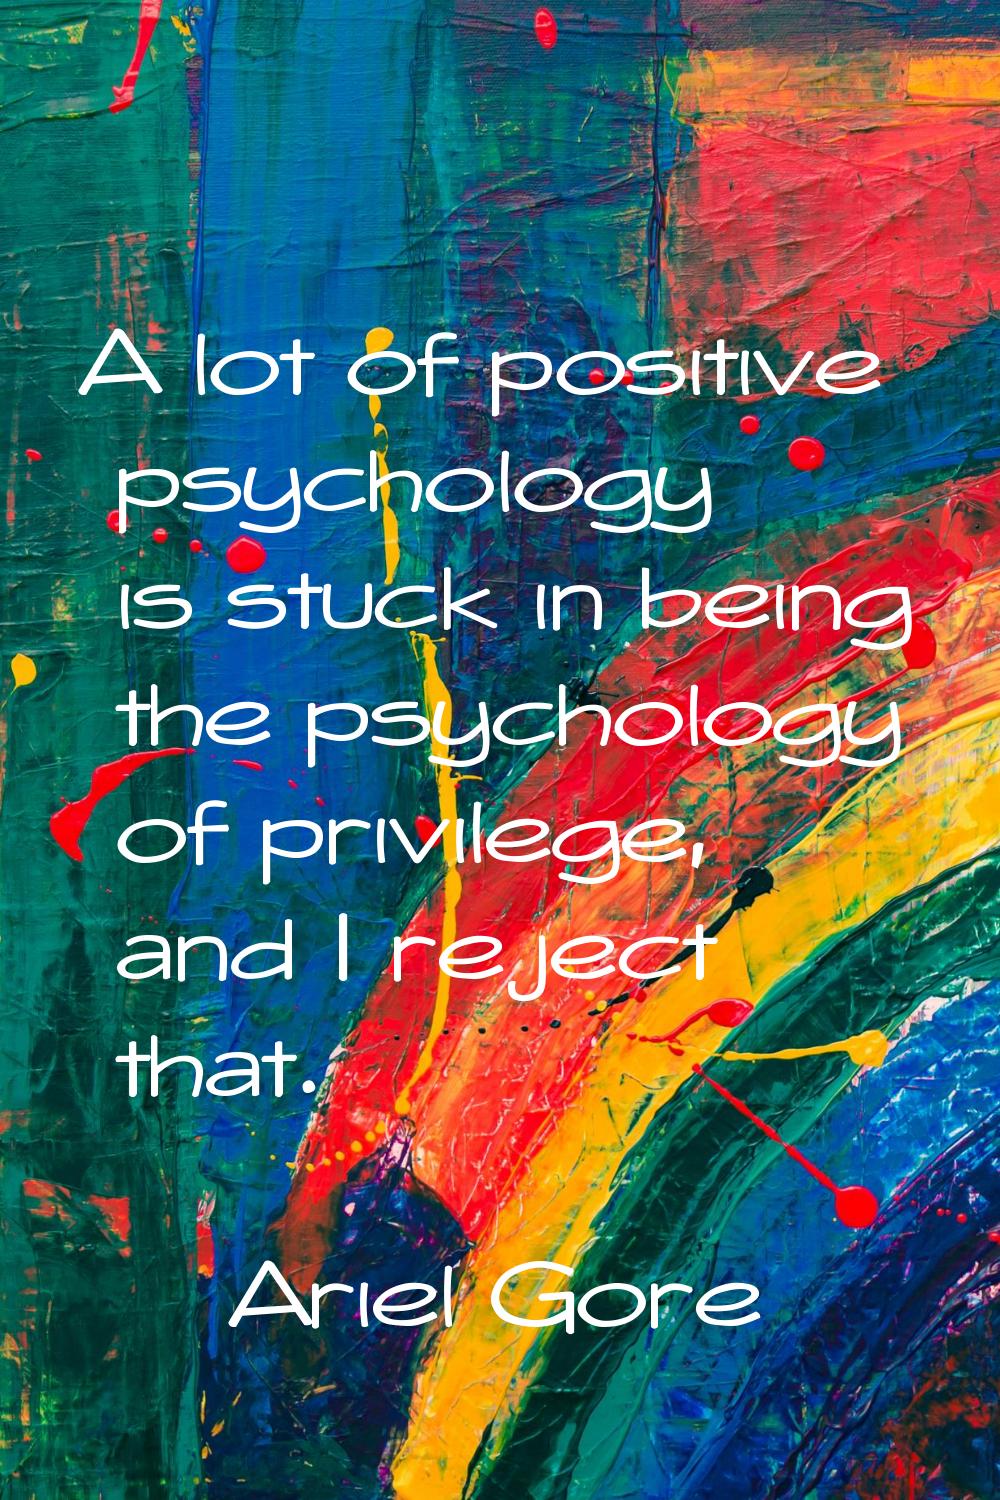 A lot of positive psychology is stuck in being the psychology of privilege, and I reject that.